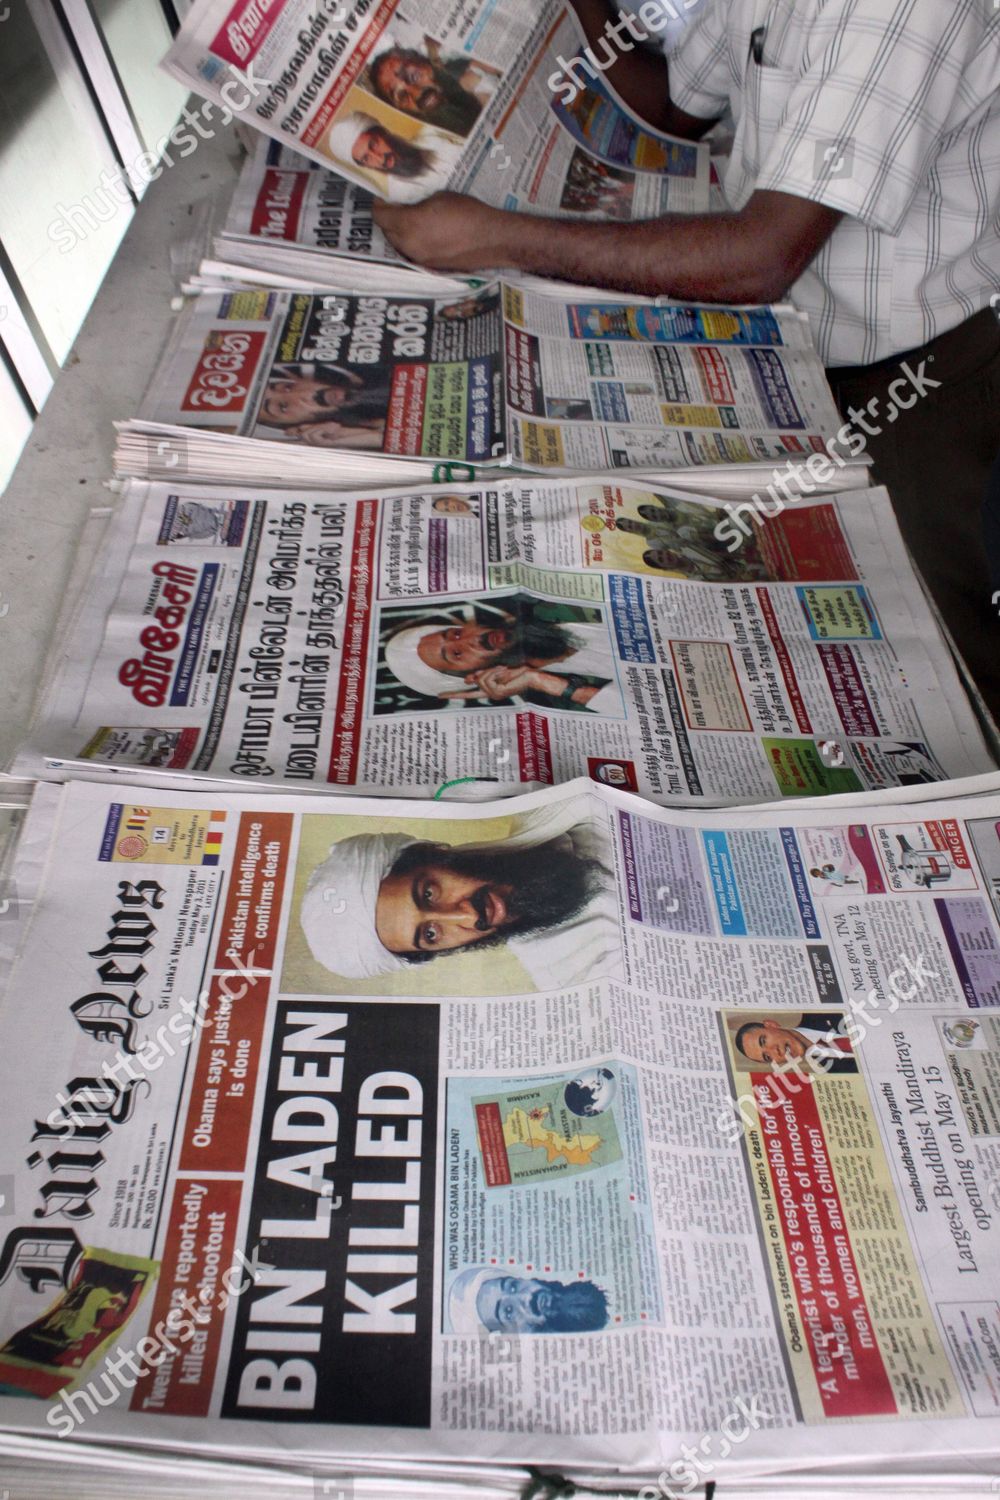 Sri Lankan Reads Tamil News Paper Frontpage Editorial Stock Photo Stock Image Shutterstock